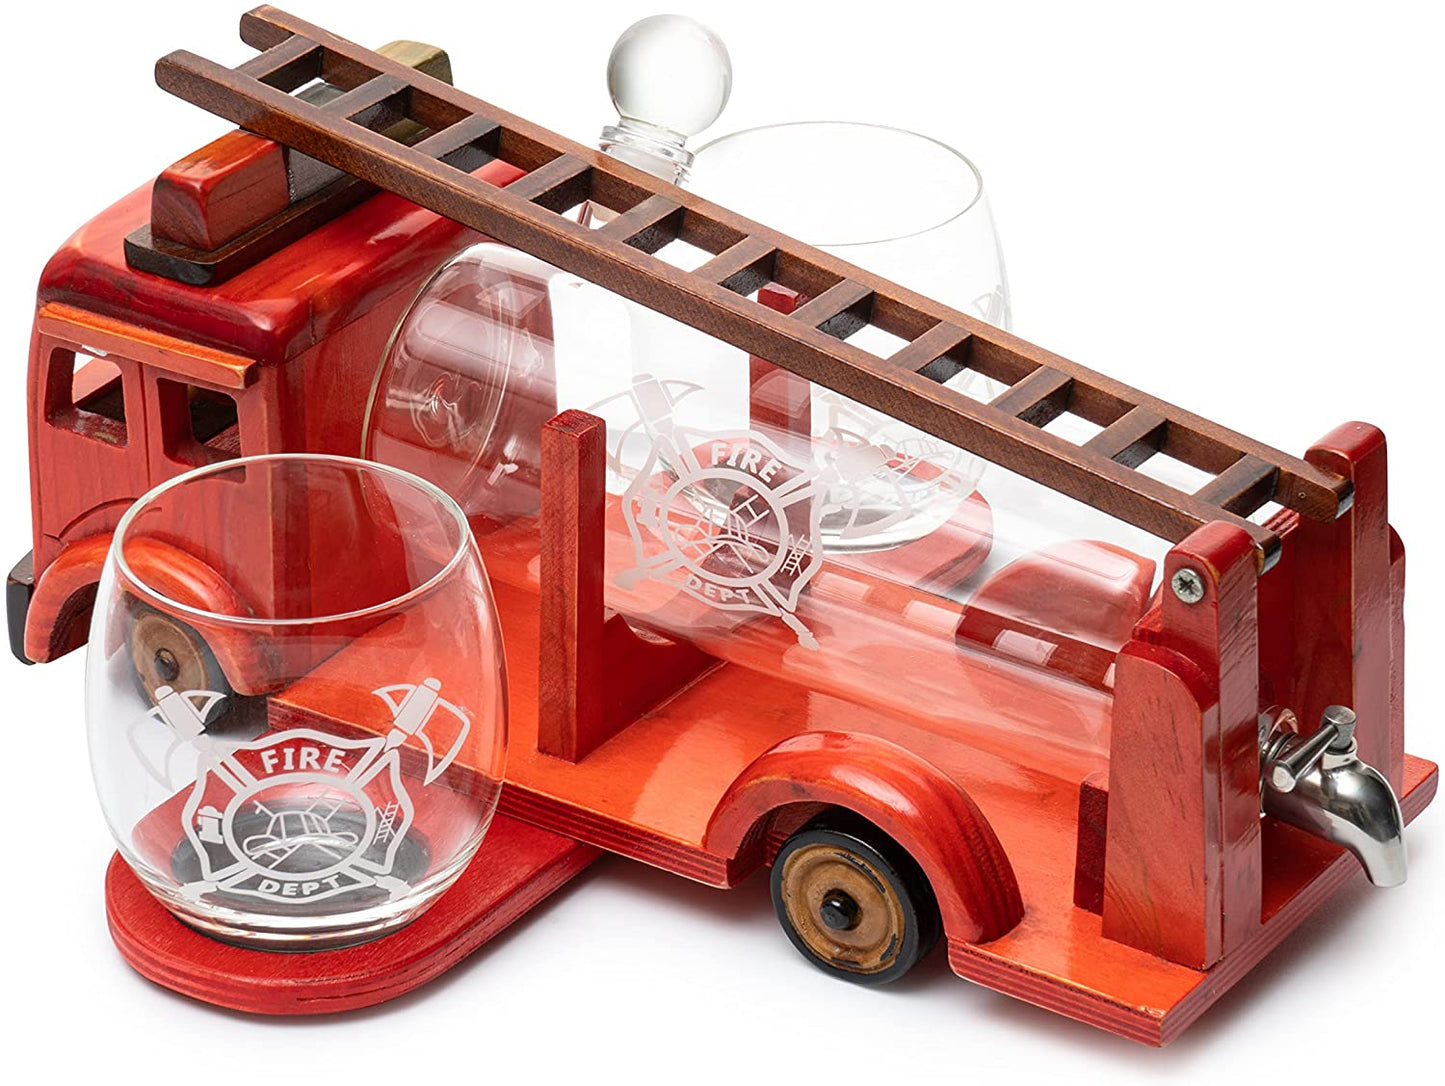 Firetruck Whiskey Decanter with Two 12 oz Glasses Gift Firefighter Gifts, Fireman, Firetruck Figurine, Police Gifts, Fire Department Gifts, Gifts for Firefighters! 600ml 13" L 6" H Gifts for Dad-4